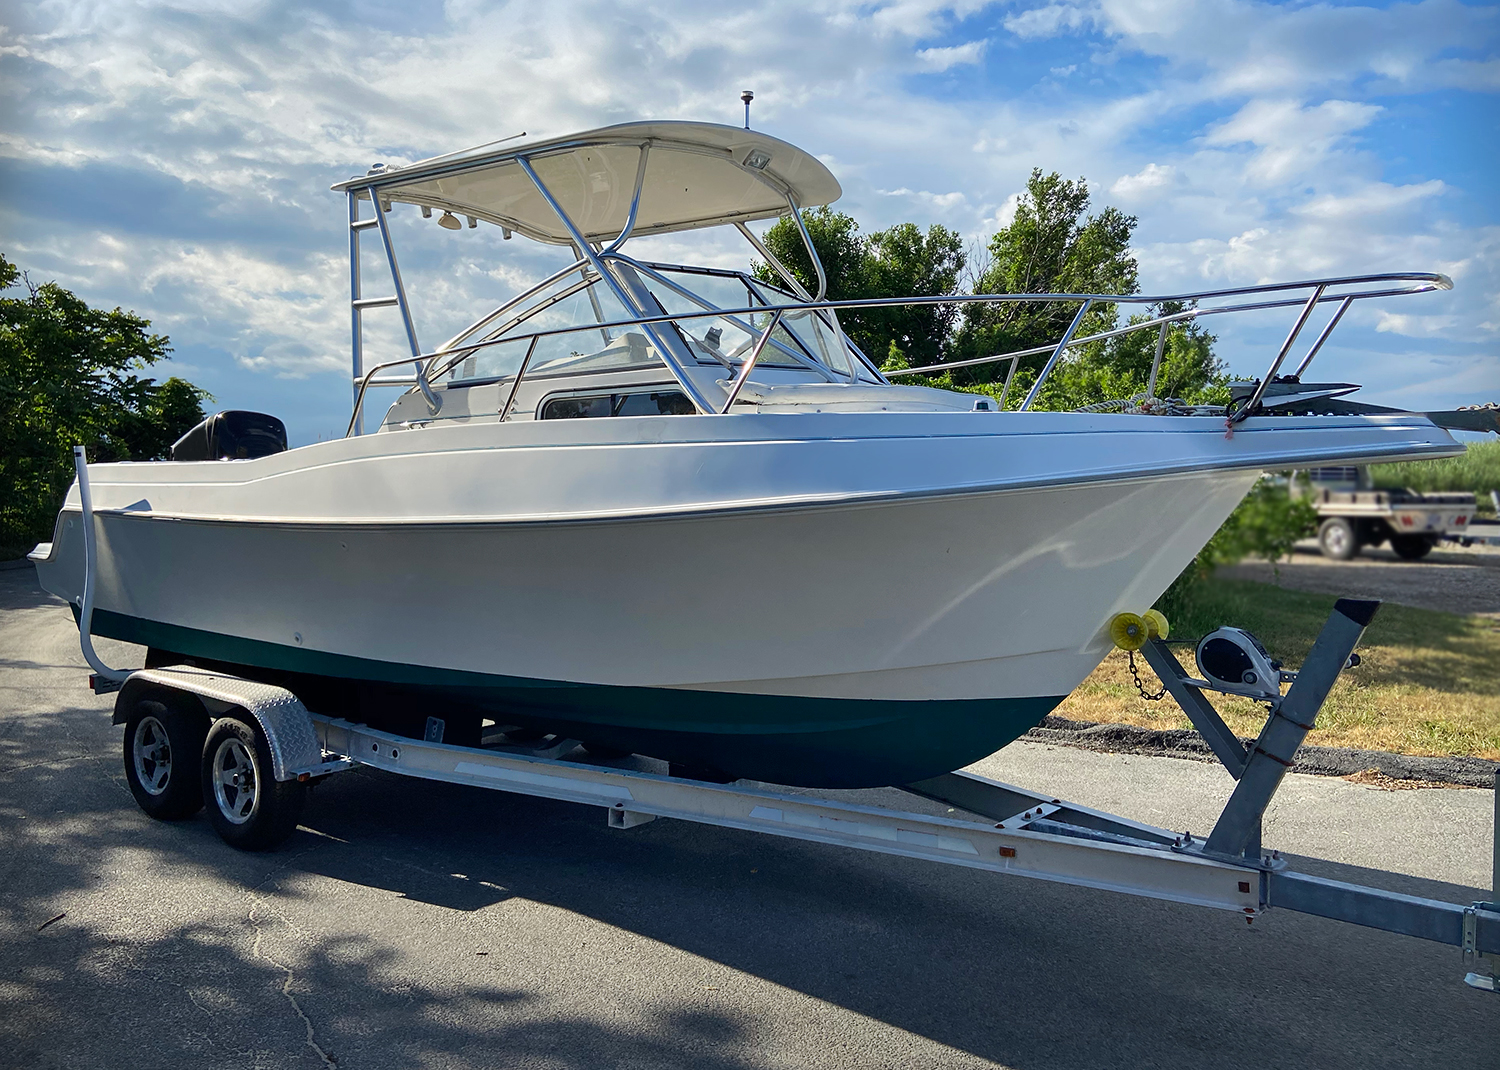 Selling Your Boat Online in The Driveway